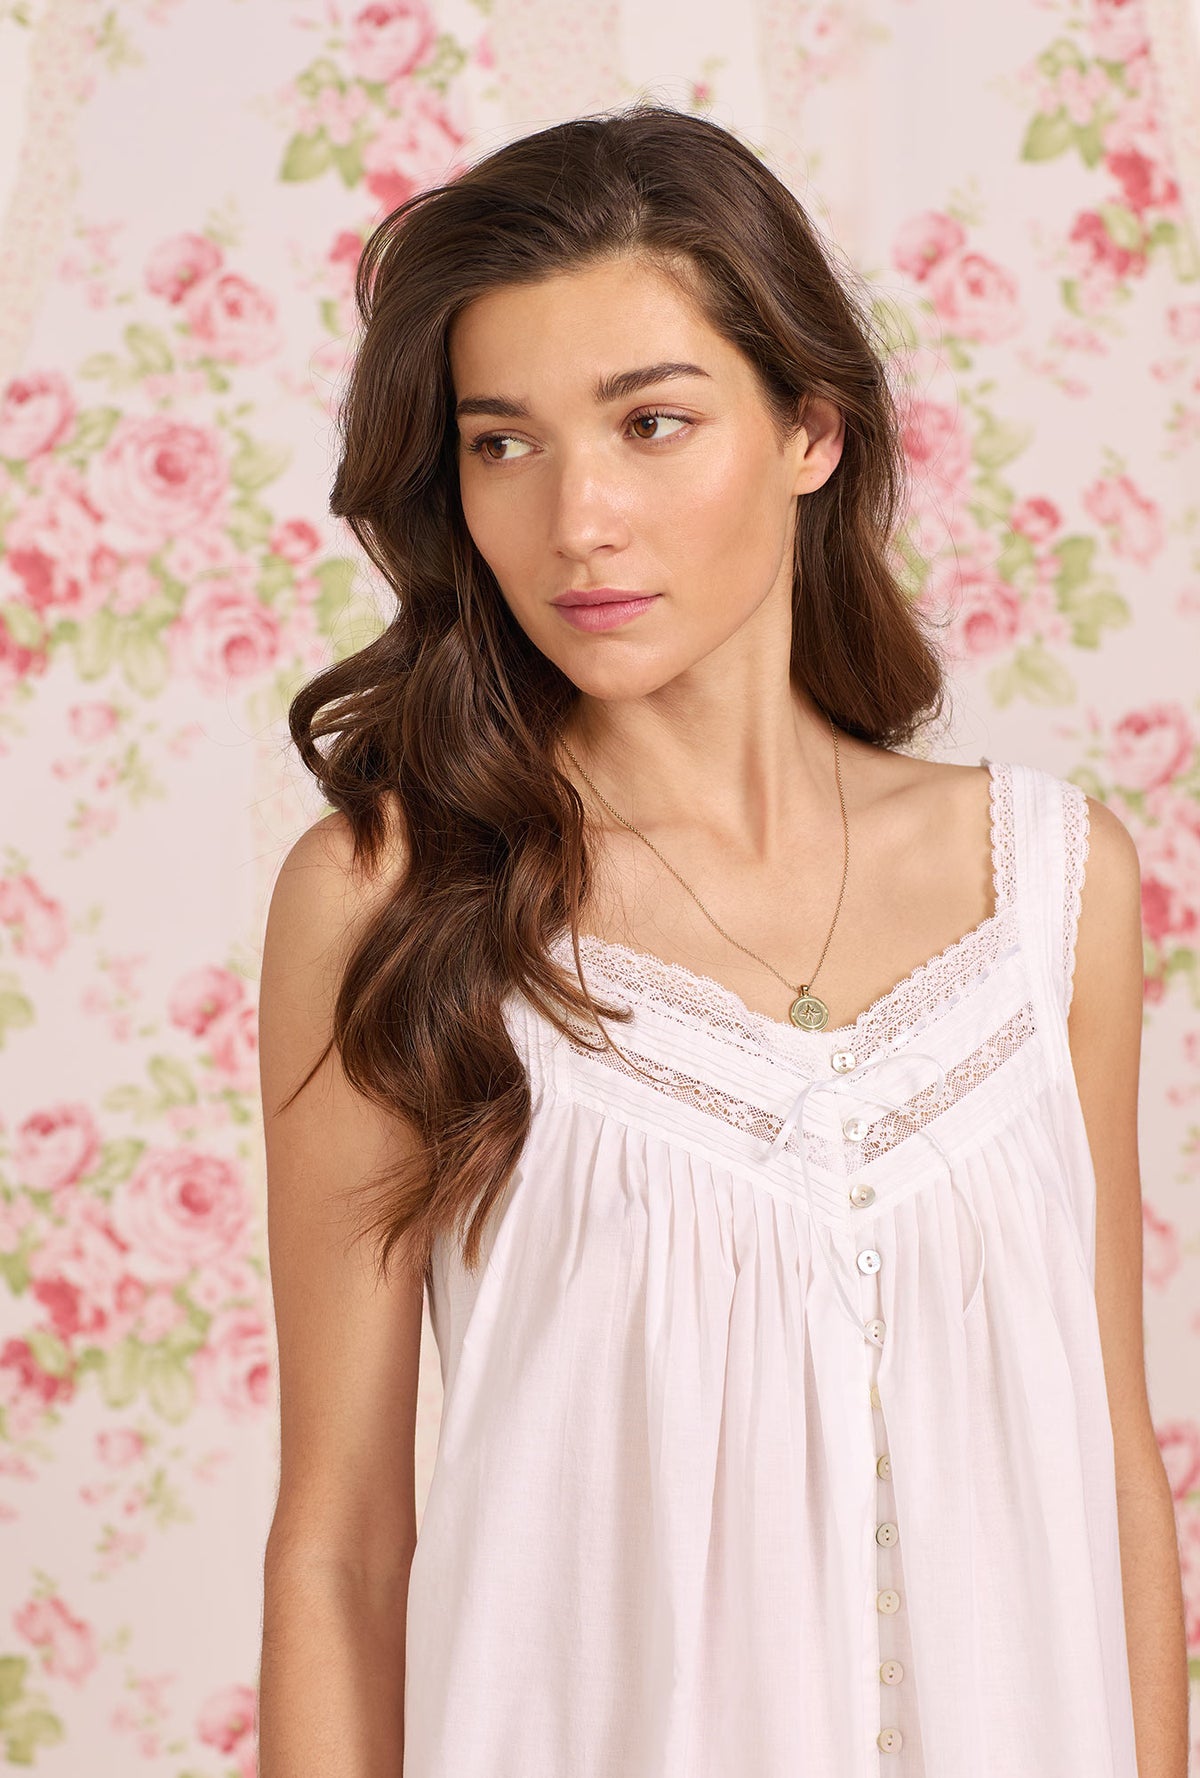   A lady wearing white sleeveless Classic White Nightgown with the rosalie print